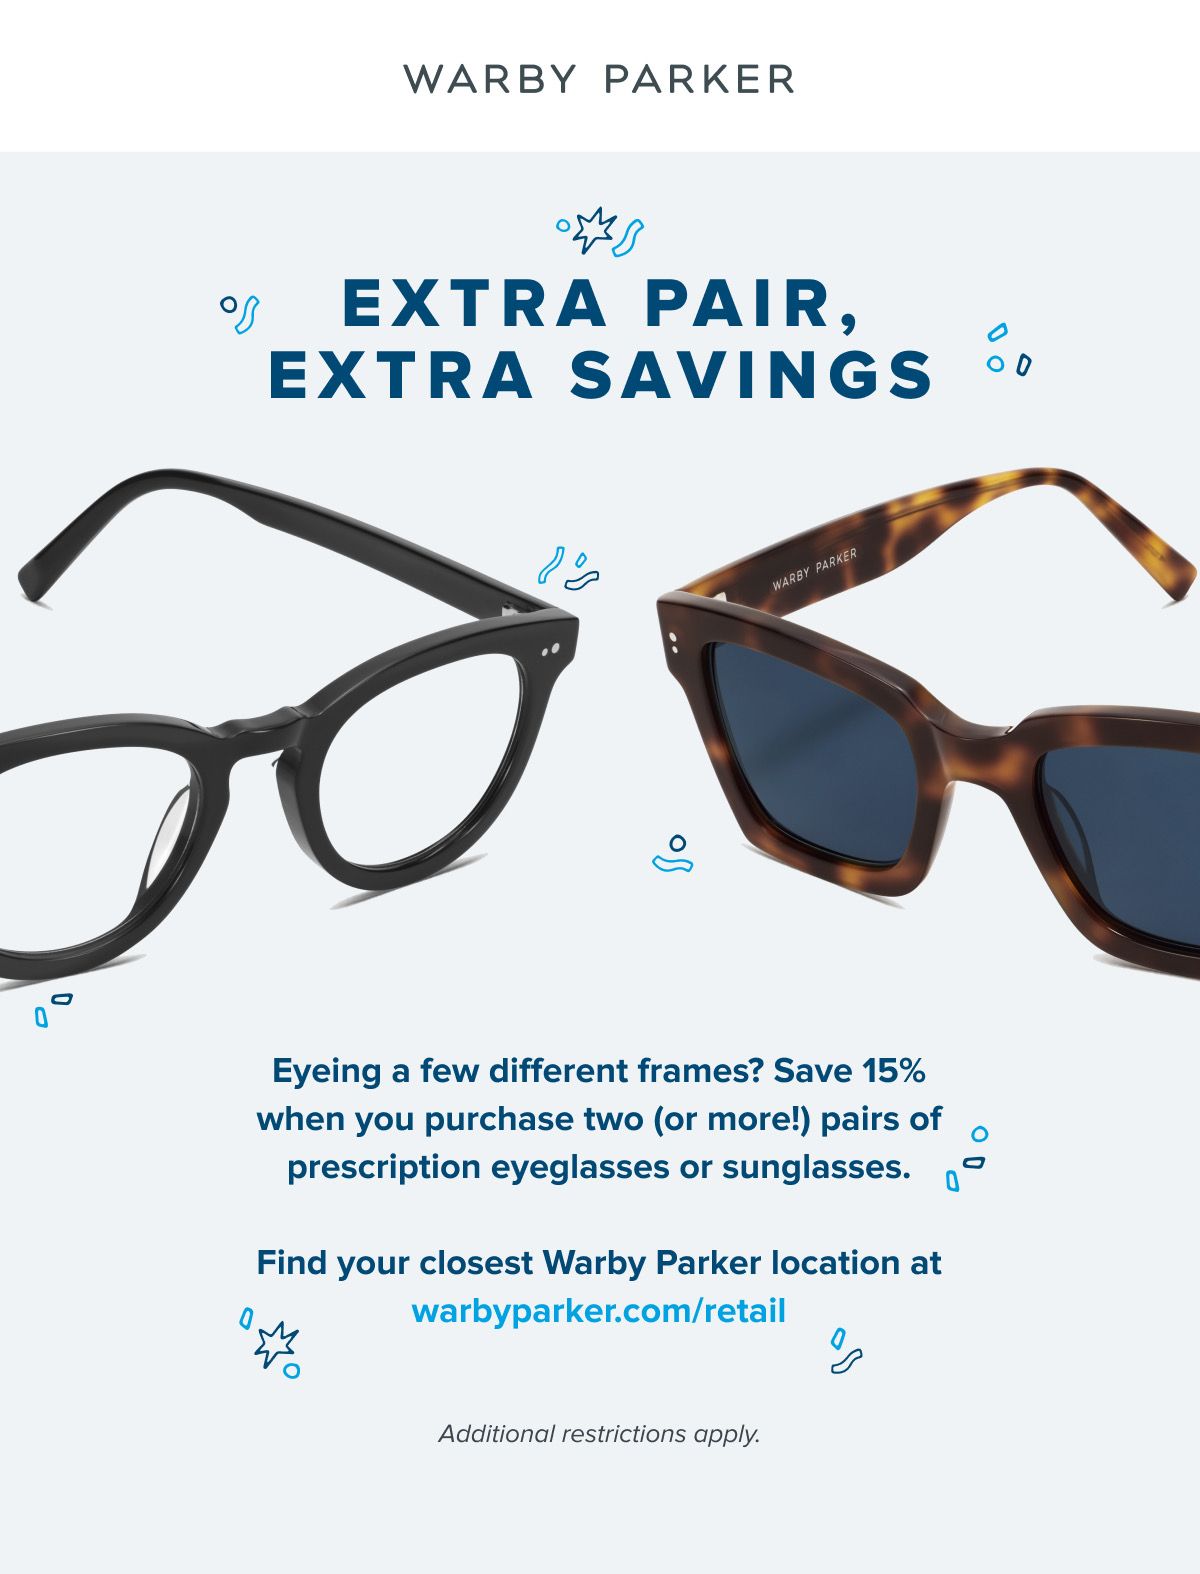 Add a Pair and Save at Warby Parker!